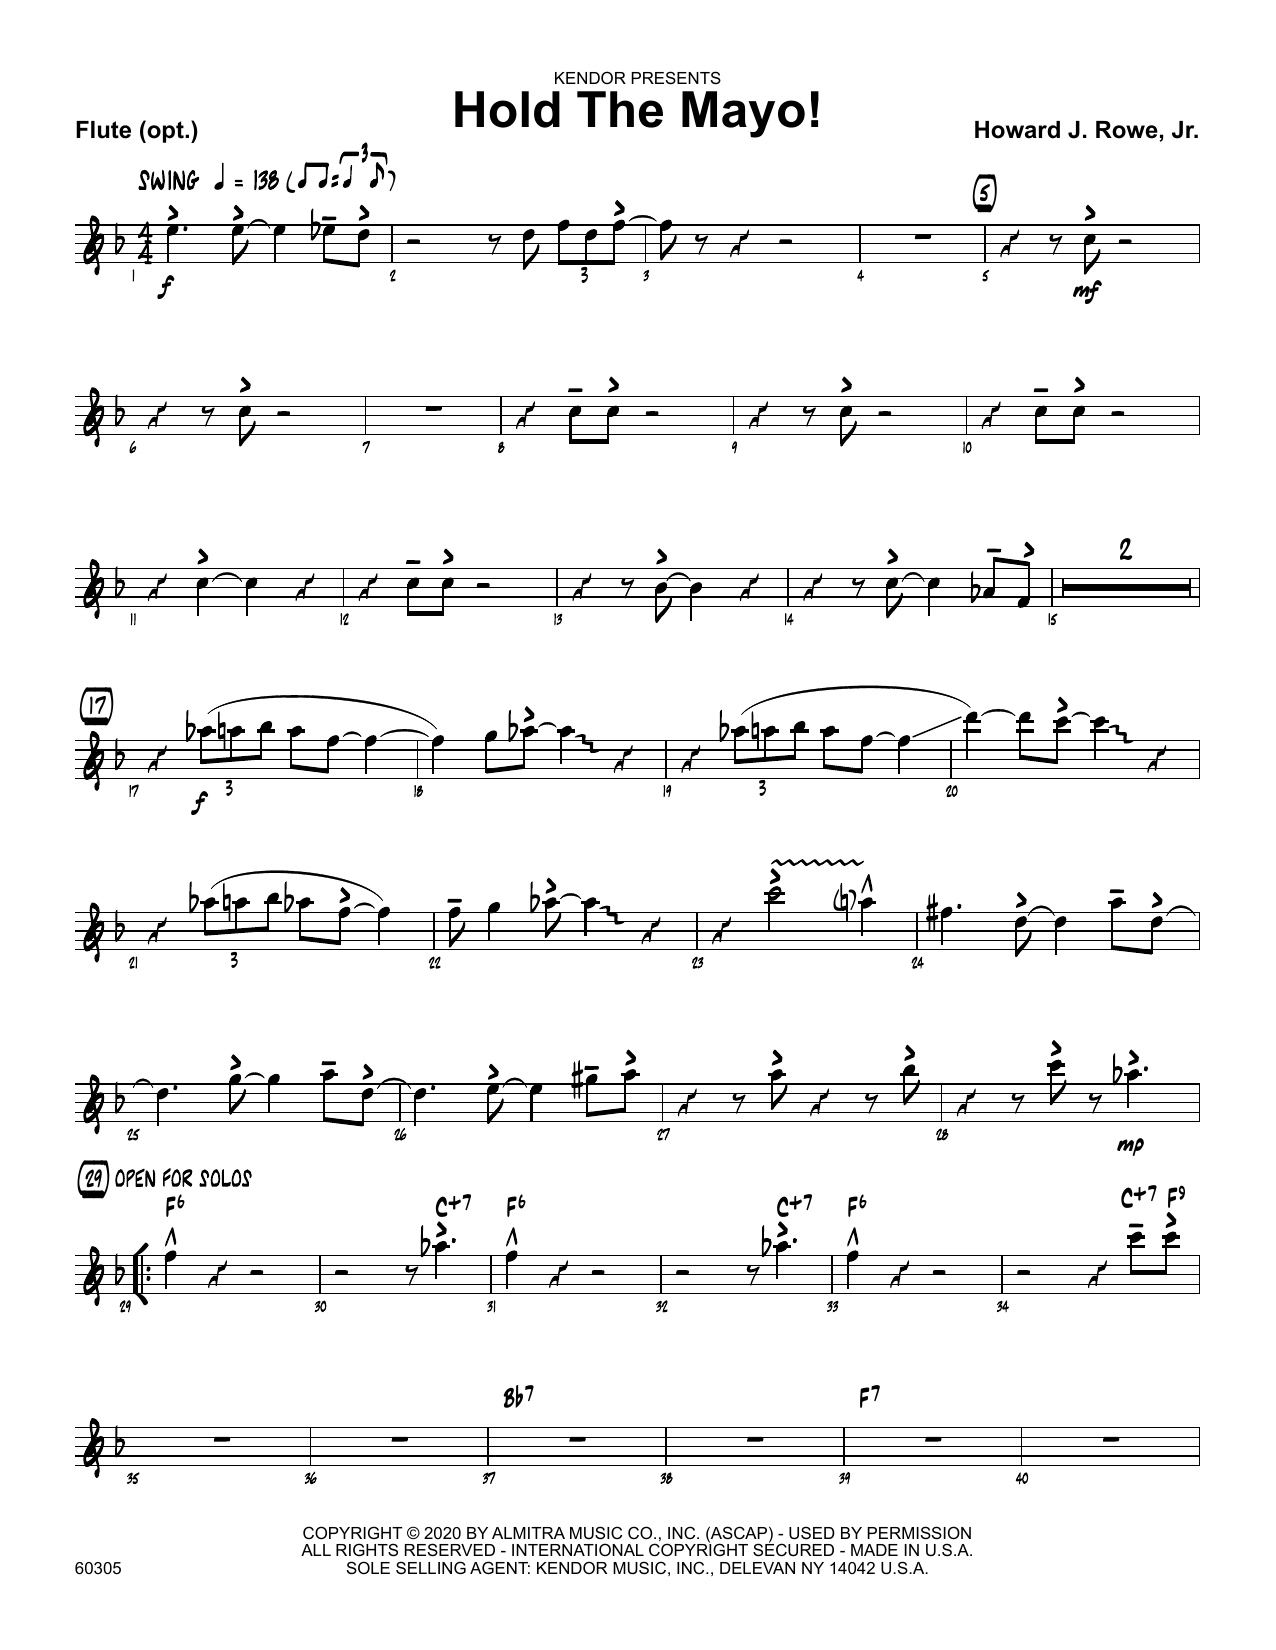 Download Howard Rowe Hold The Mayo! - Flute Sheet Music